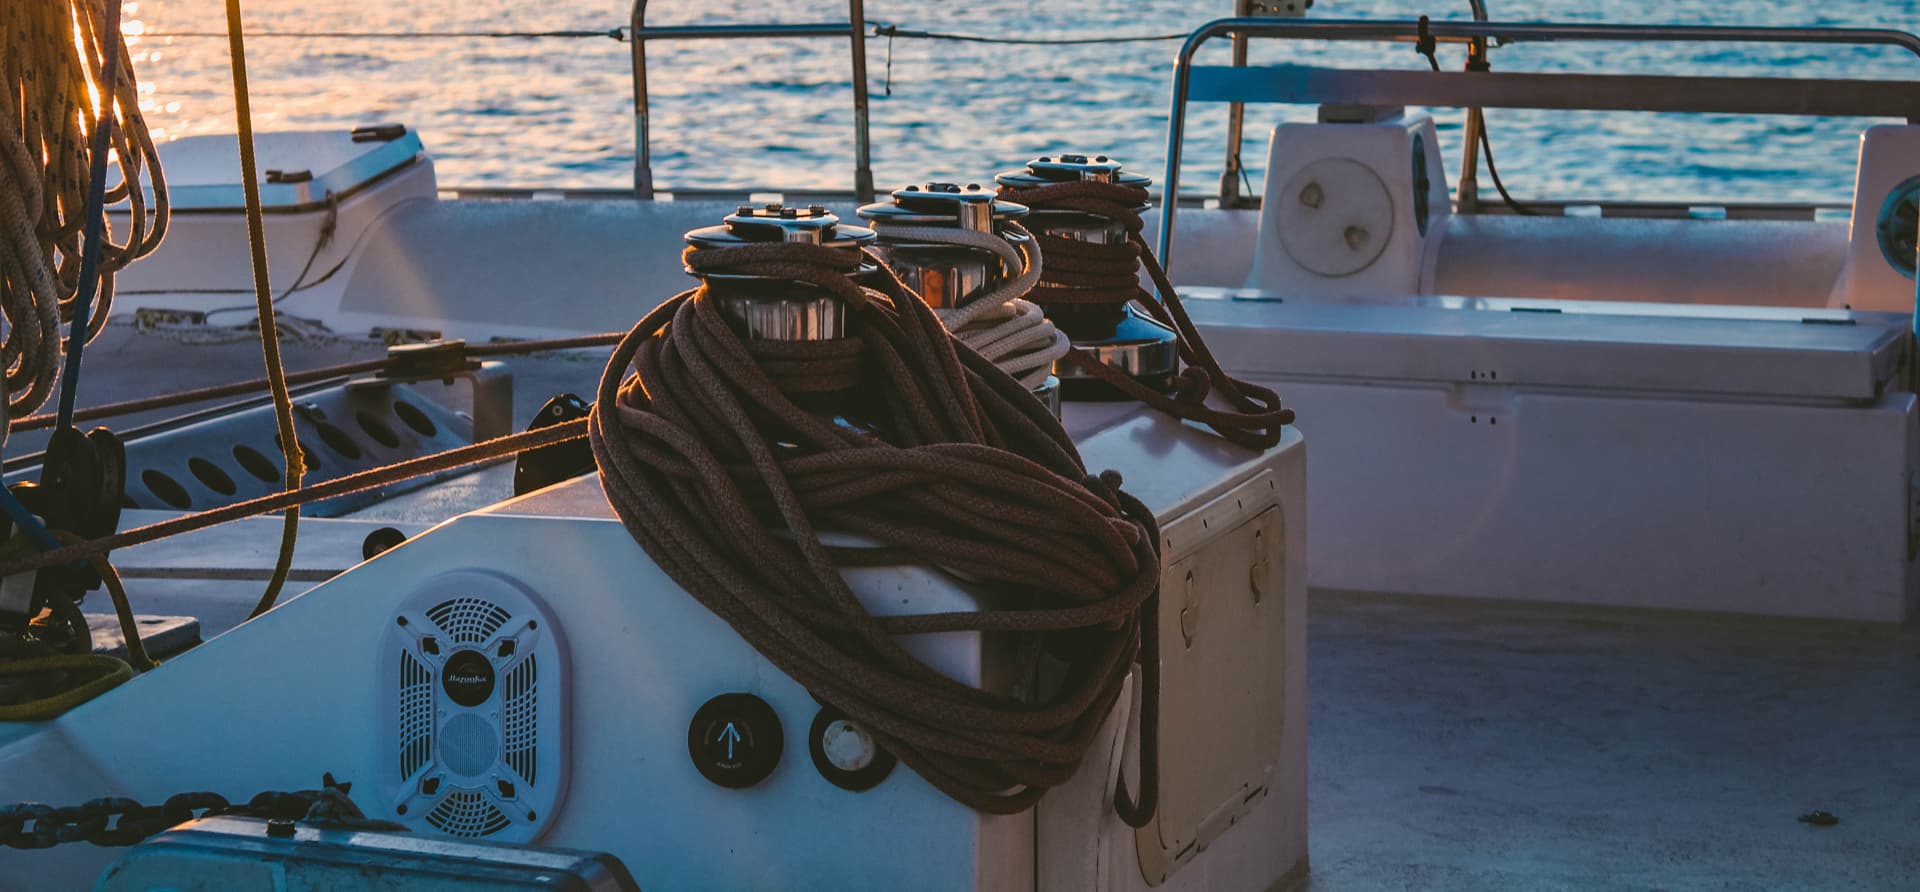 An image of boat speakers on a sailboat.